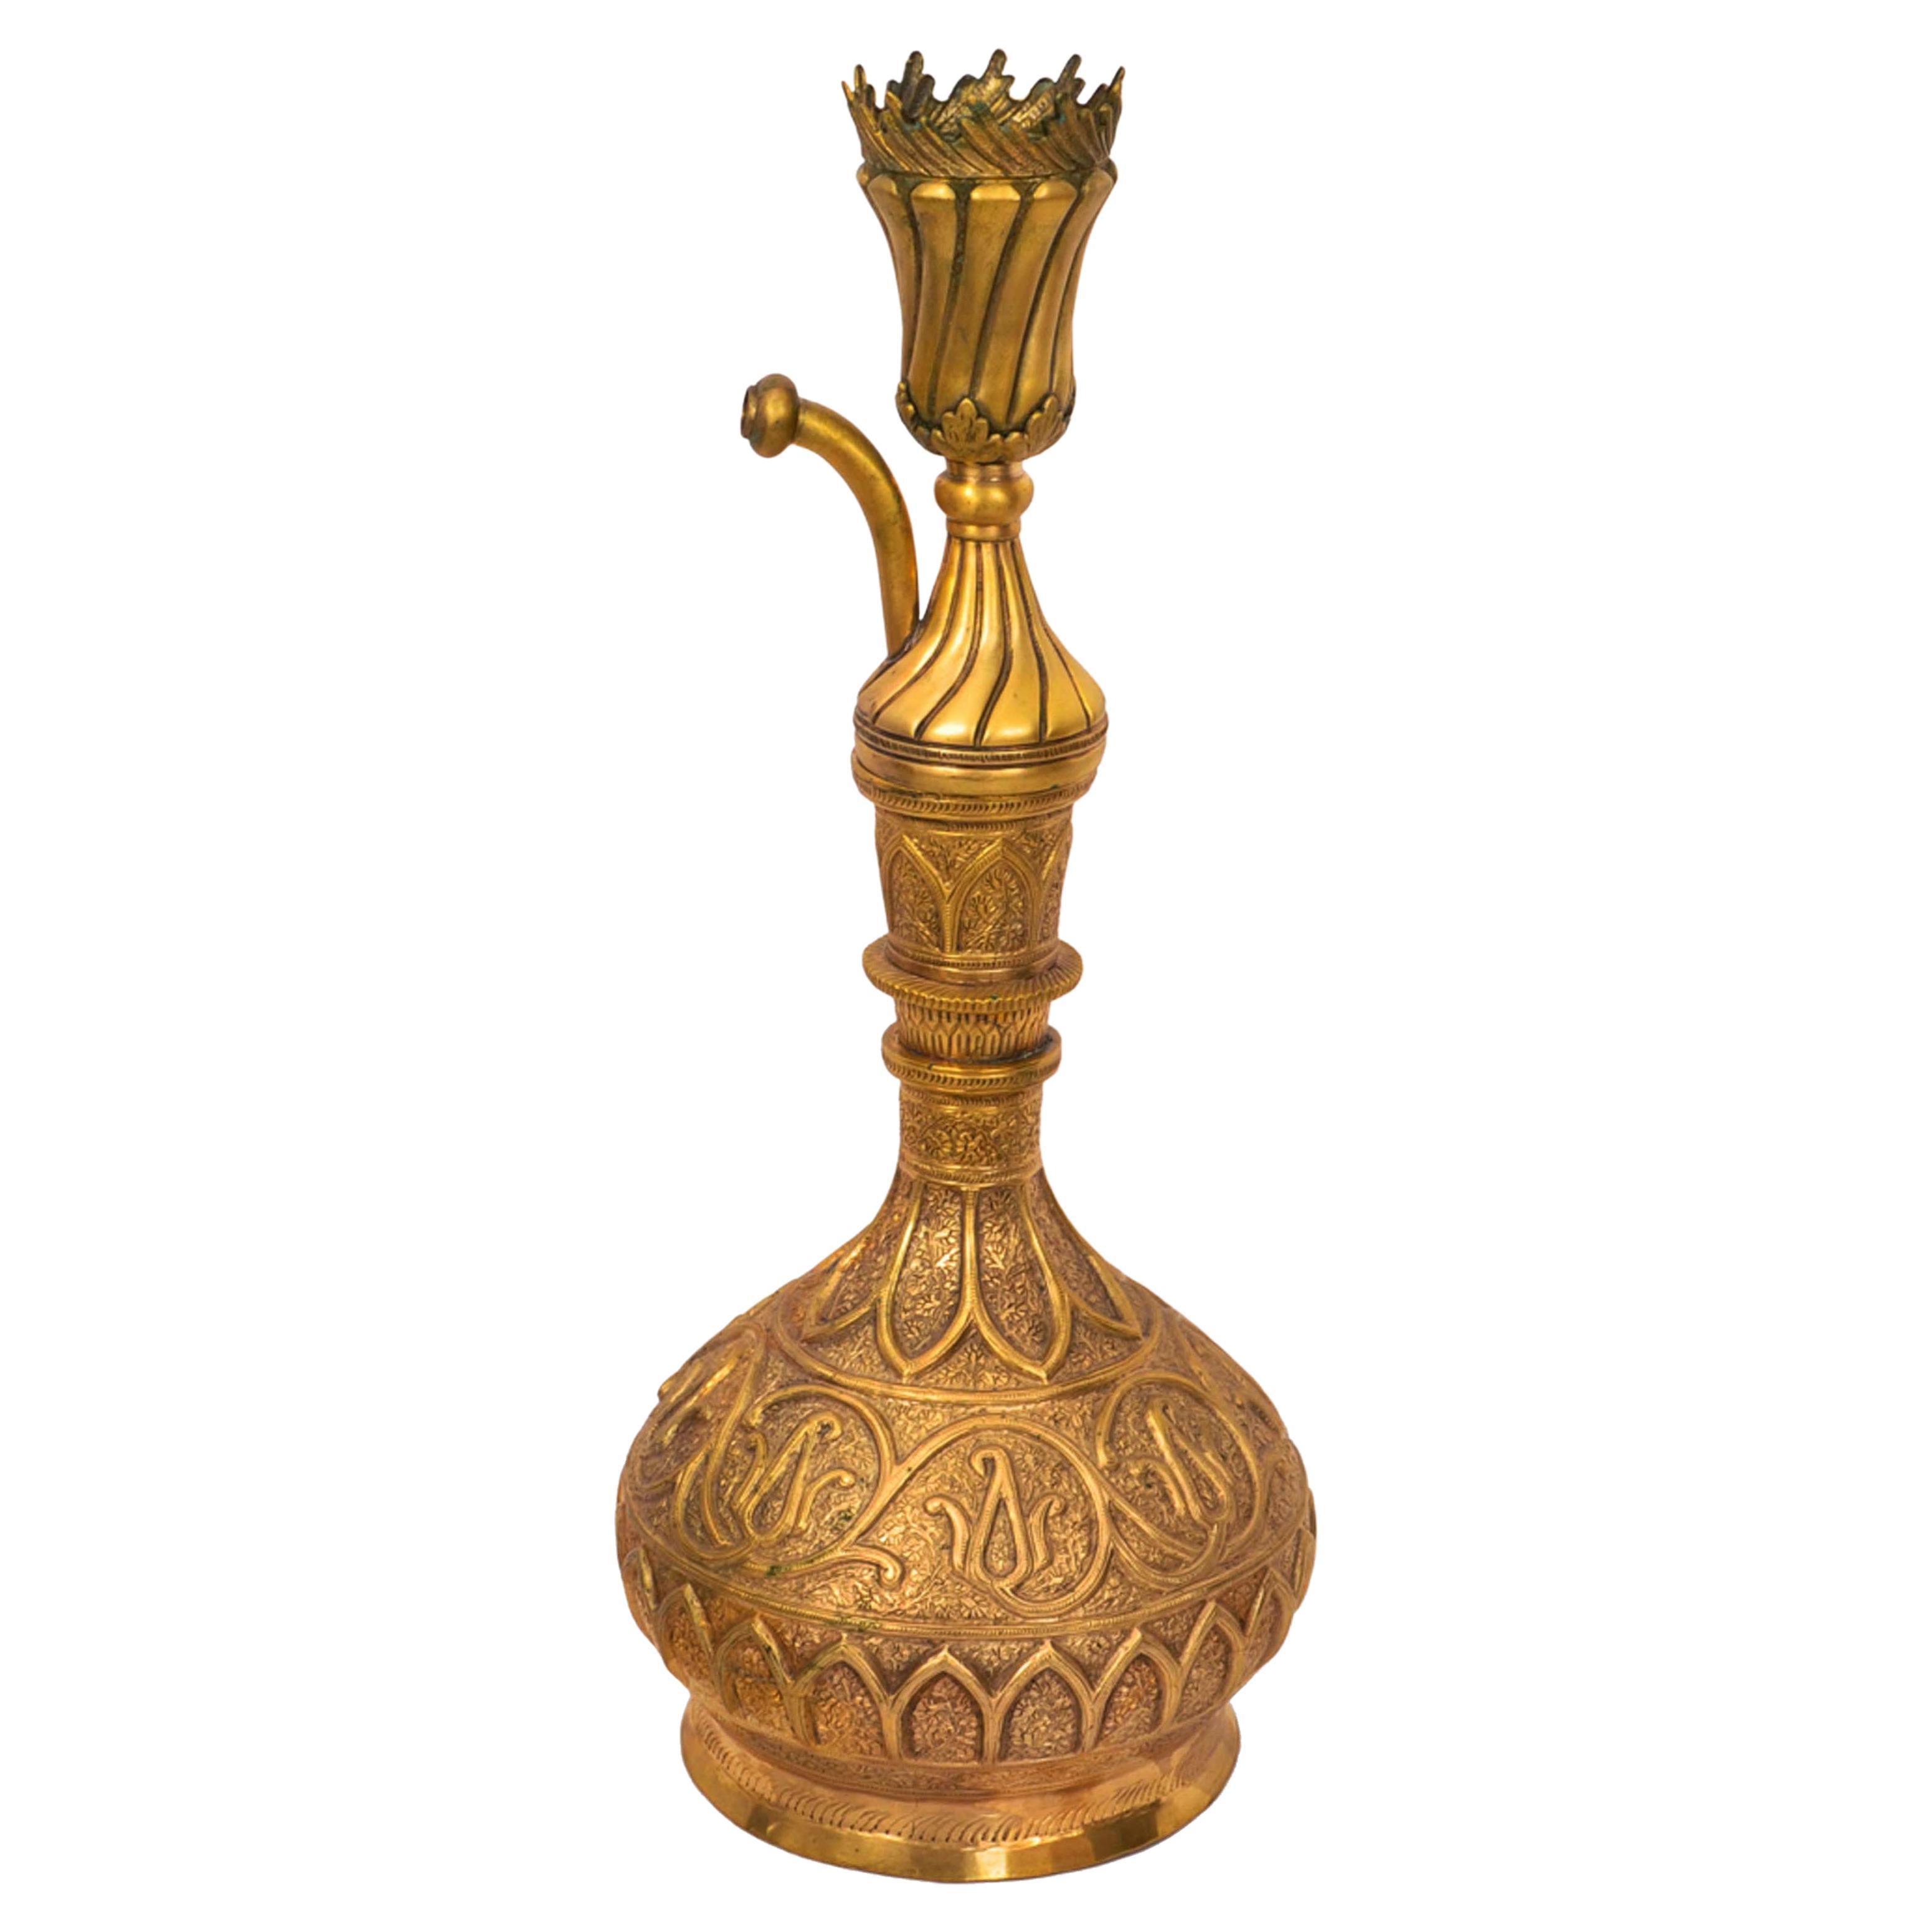 A fine & rare antique 19th Century Ottoman Tombak (Gilt Copper) Nargile or Hookah pipe, Turkey, circa 1850.
A nagile or hookah pipe's history dates back as far back as the 16th century, this very fine Tombak or gilt-copper version dates to the